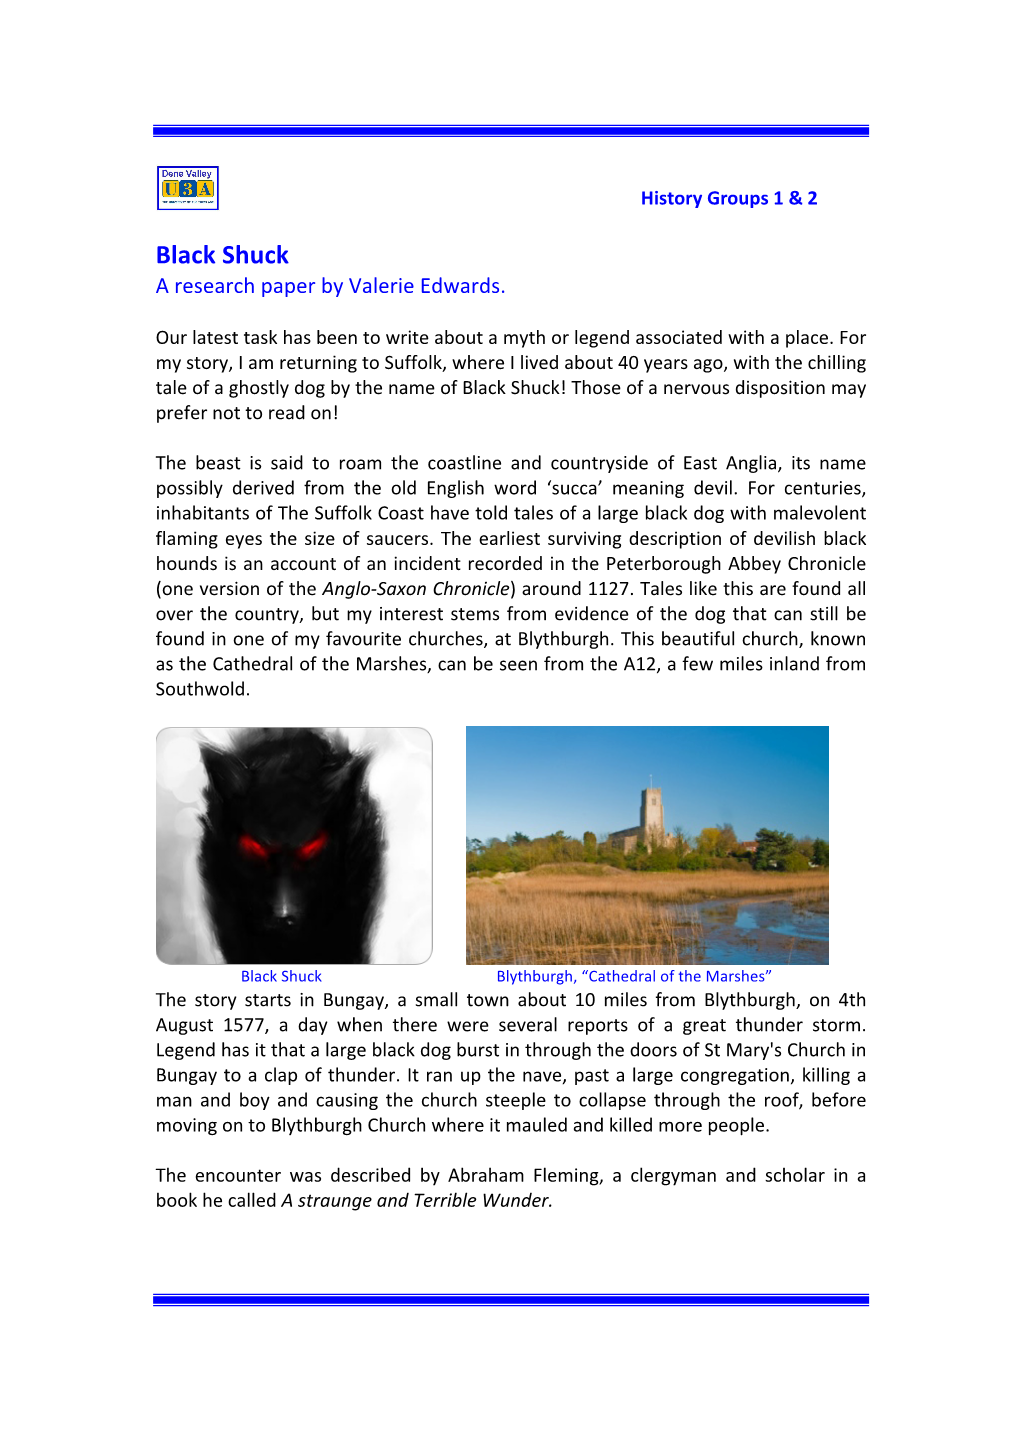 Black Shuck a Research Paper by Valerie Edwards